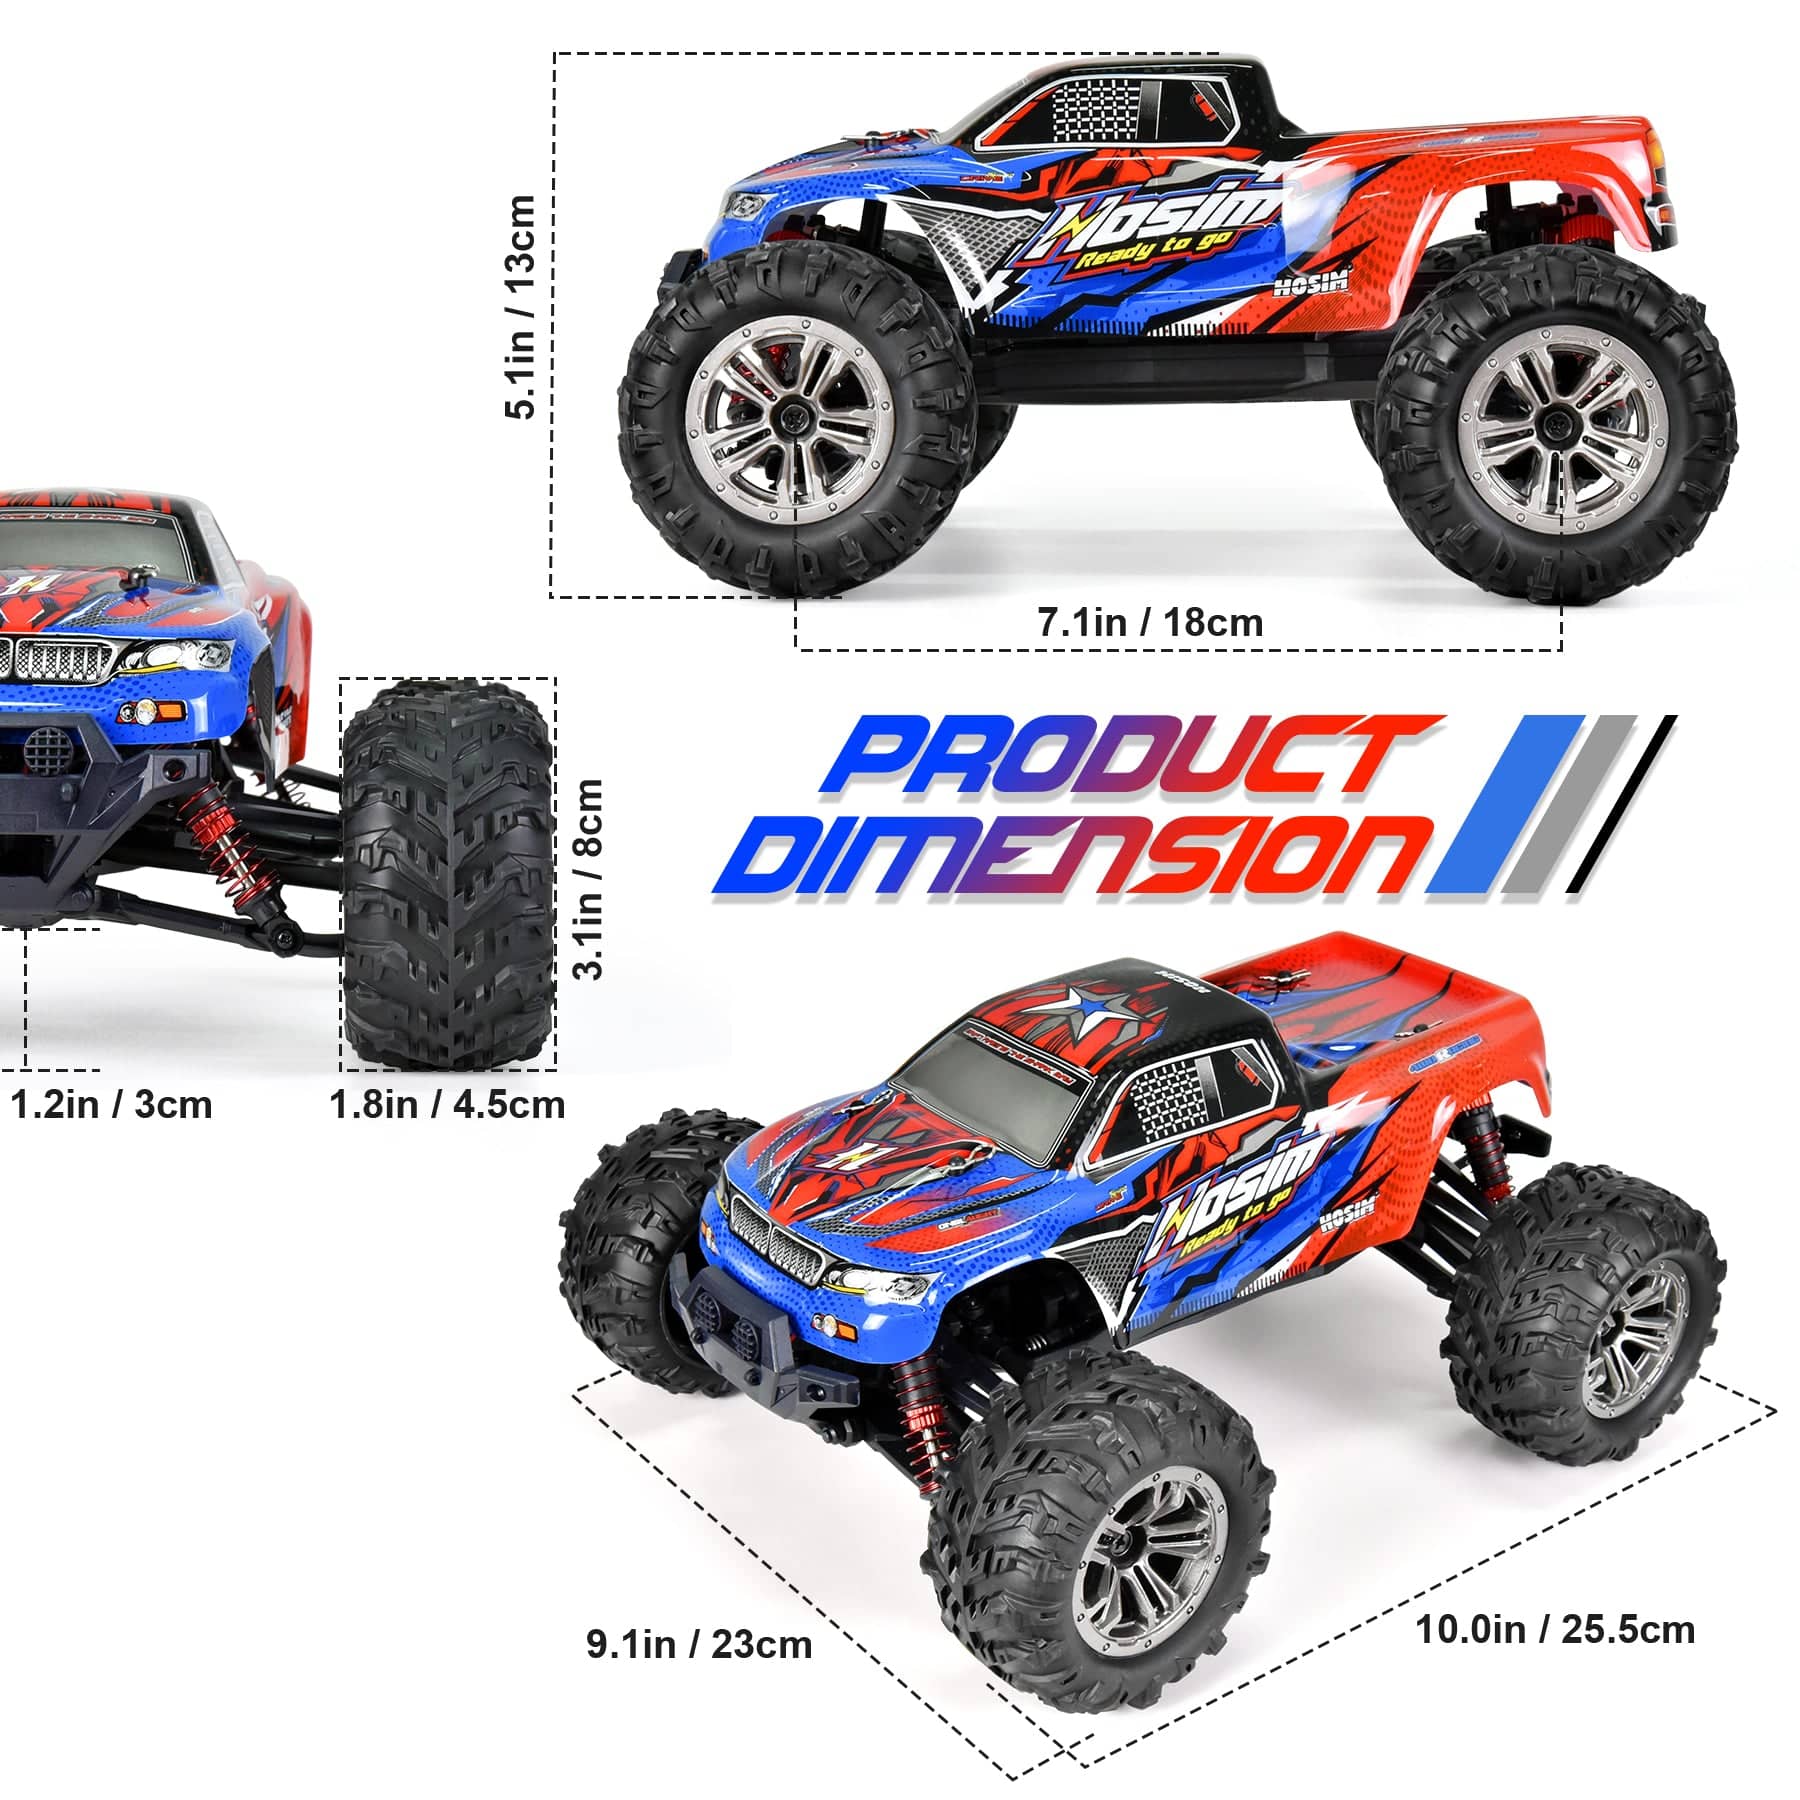 Hosim 1:16 RC Cars  RC Monster Truck 36+KPH All Terrain 4WD Off Road Vehiclefor Boys Kids and Adults Gift